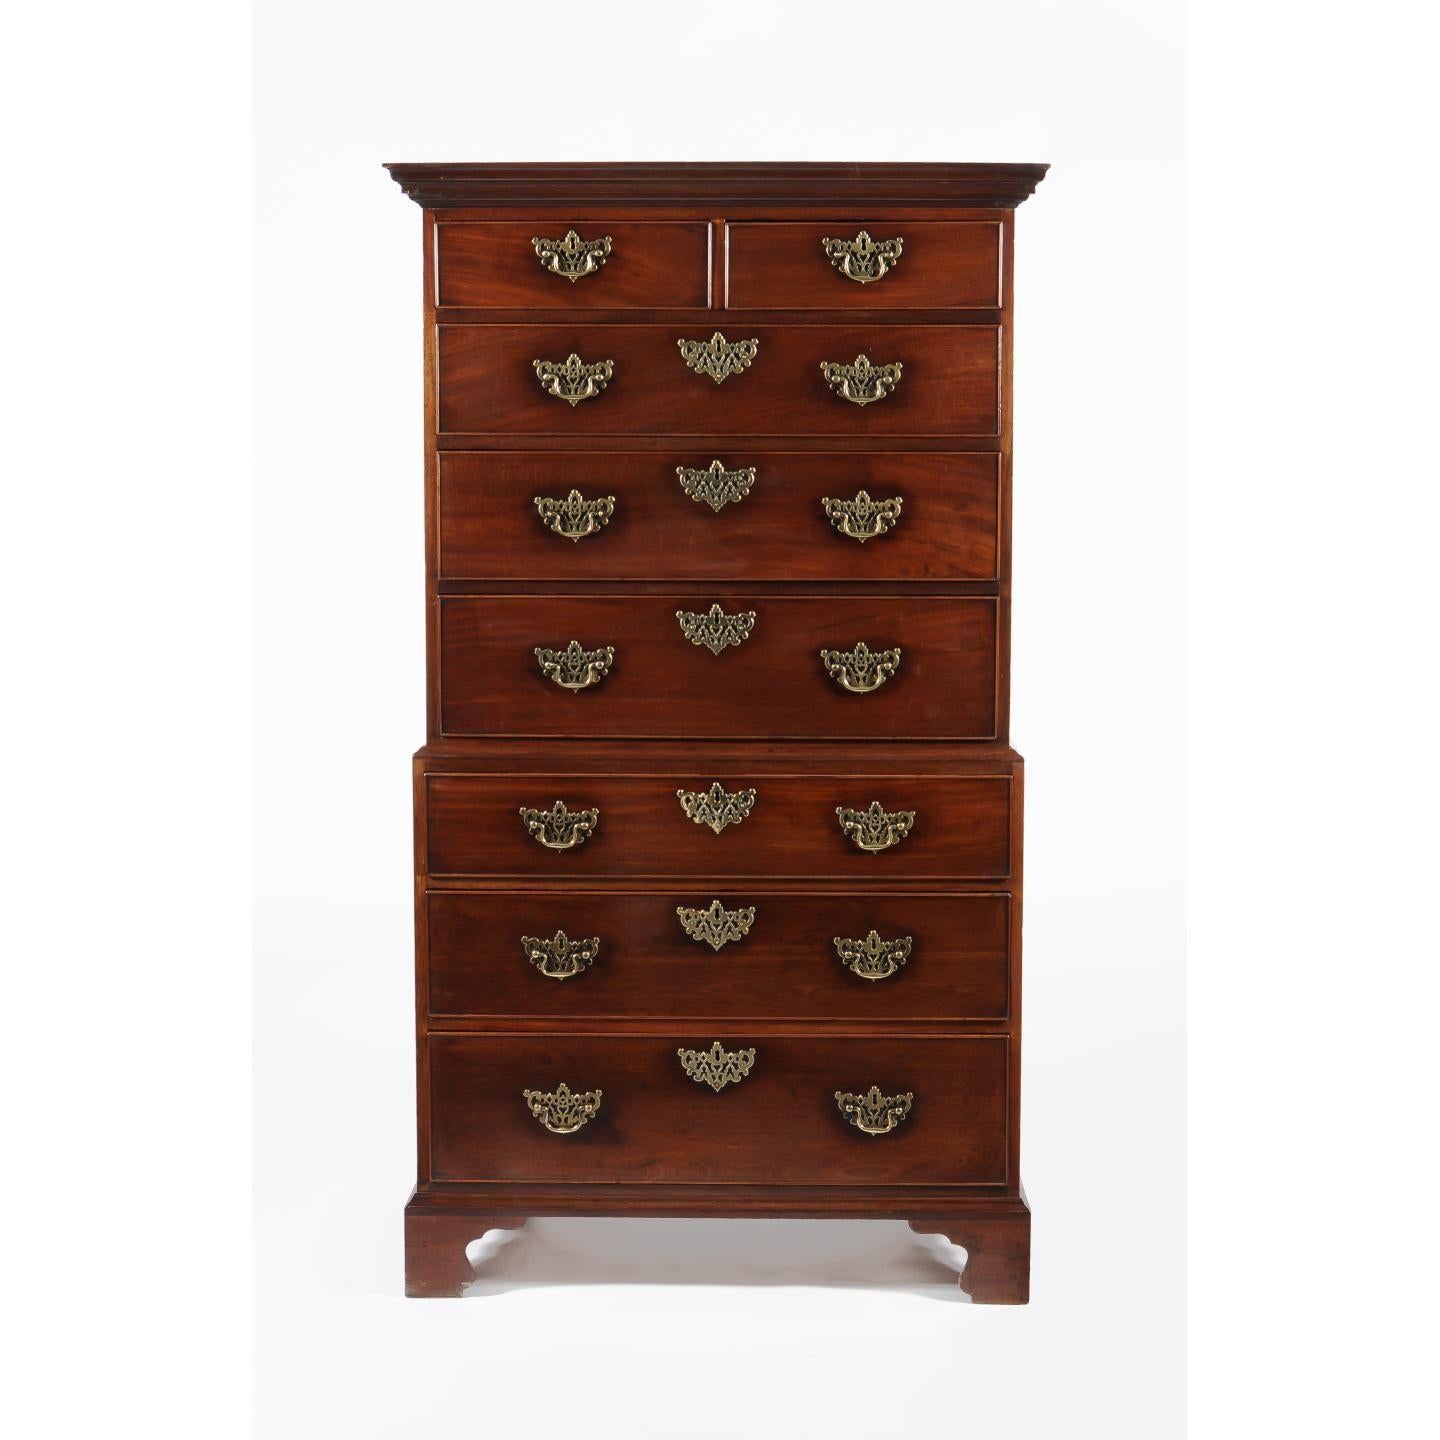 We are delighted to offer for sale this fine George III period small mahogany Chest on Chest, circa 1780. The moulded cornice above two short and six long graduated drawers standing on shaped bracket feet.

Height: 175cm (68.9in)
Width: 100cm